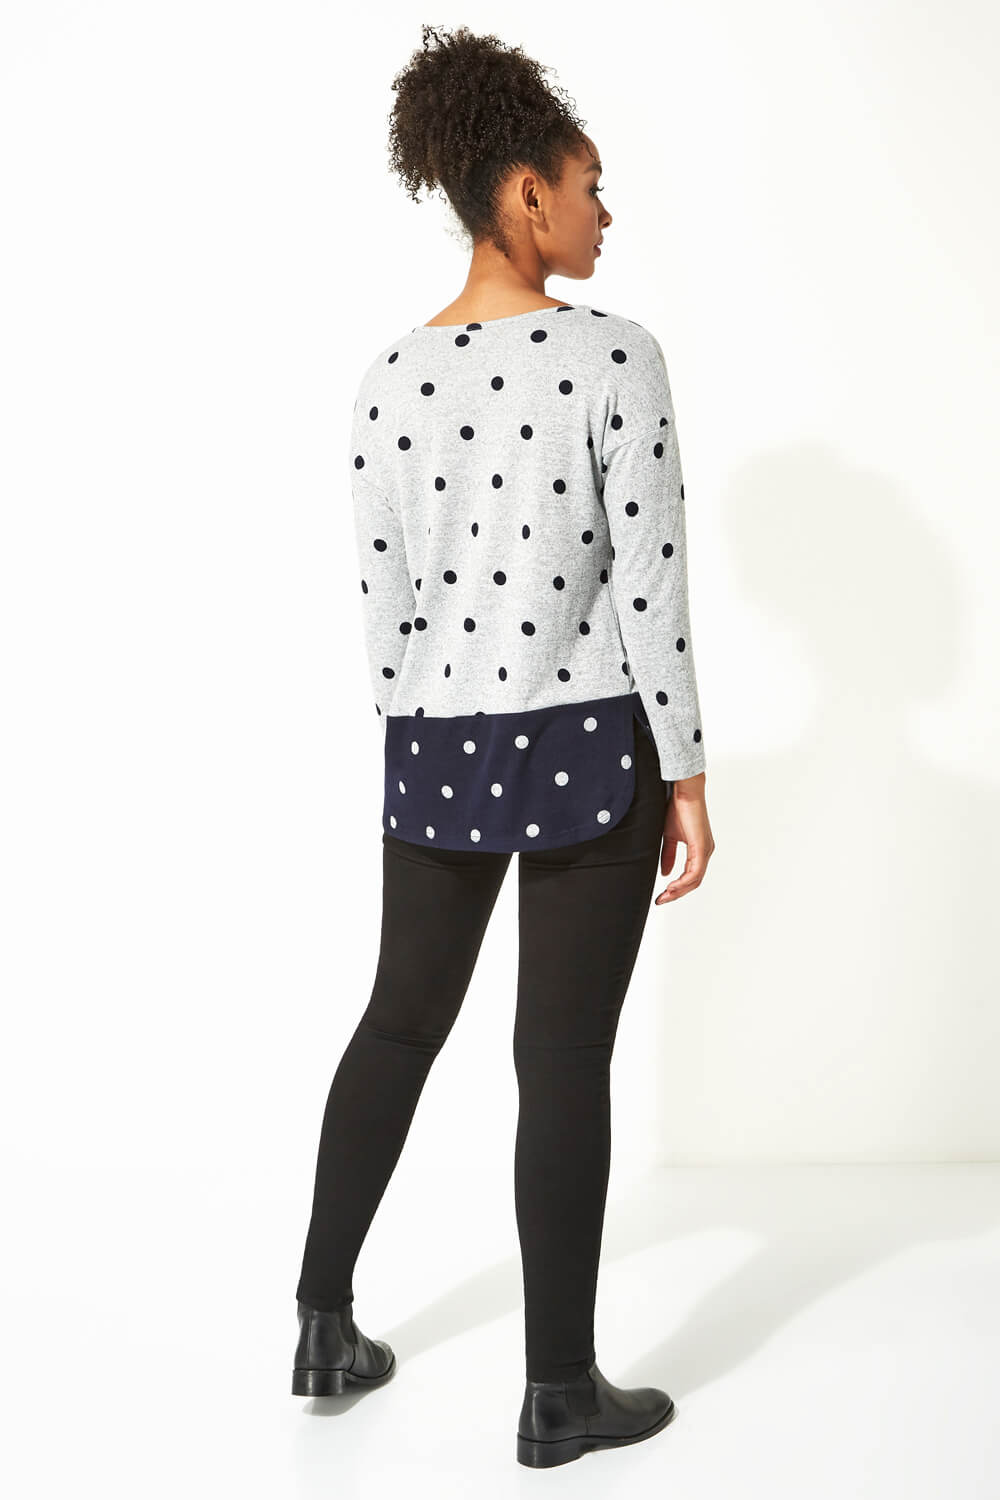 Grey Contrast Polka Dot Round Neck Long Sleeve Top, Image 3 of 4